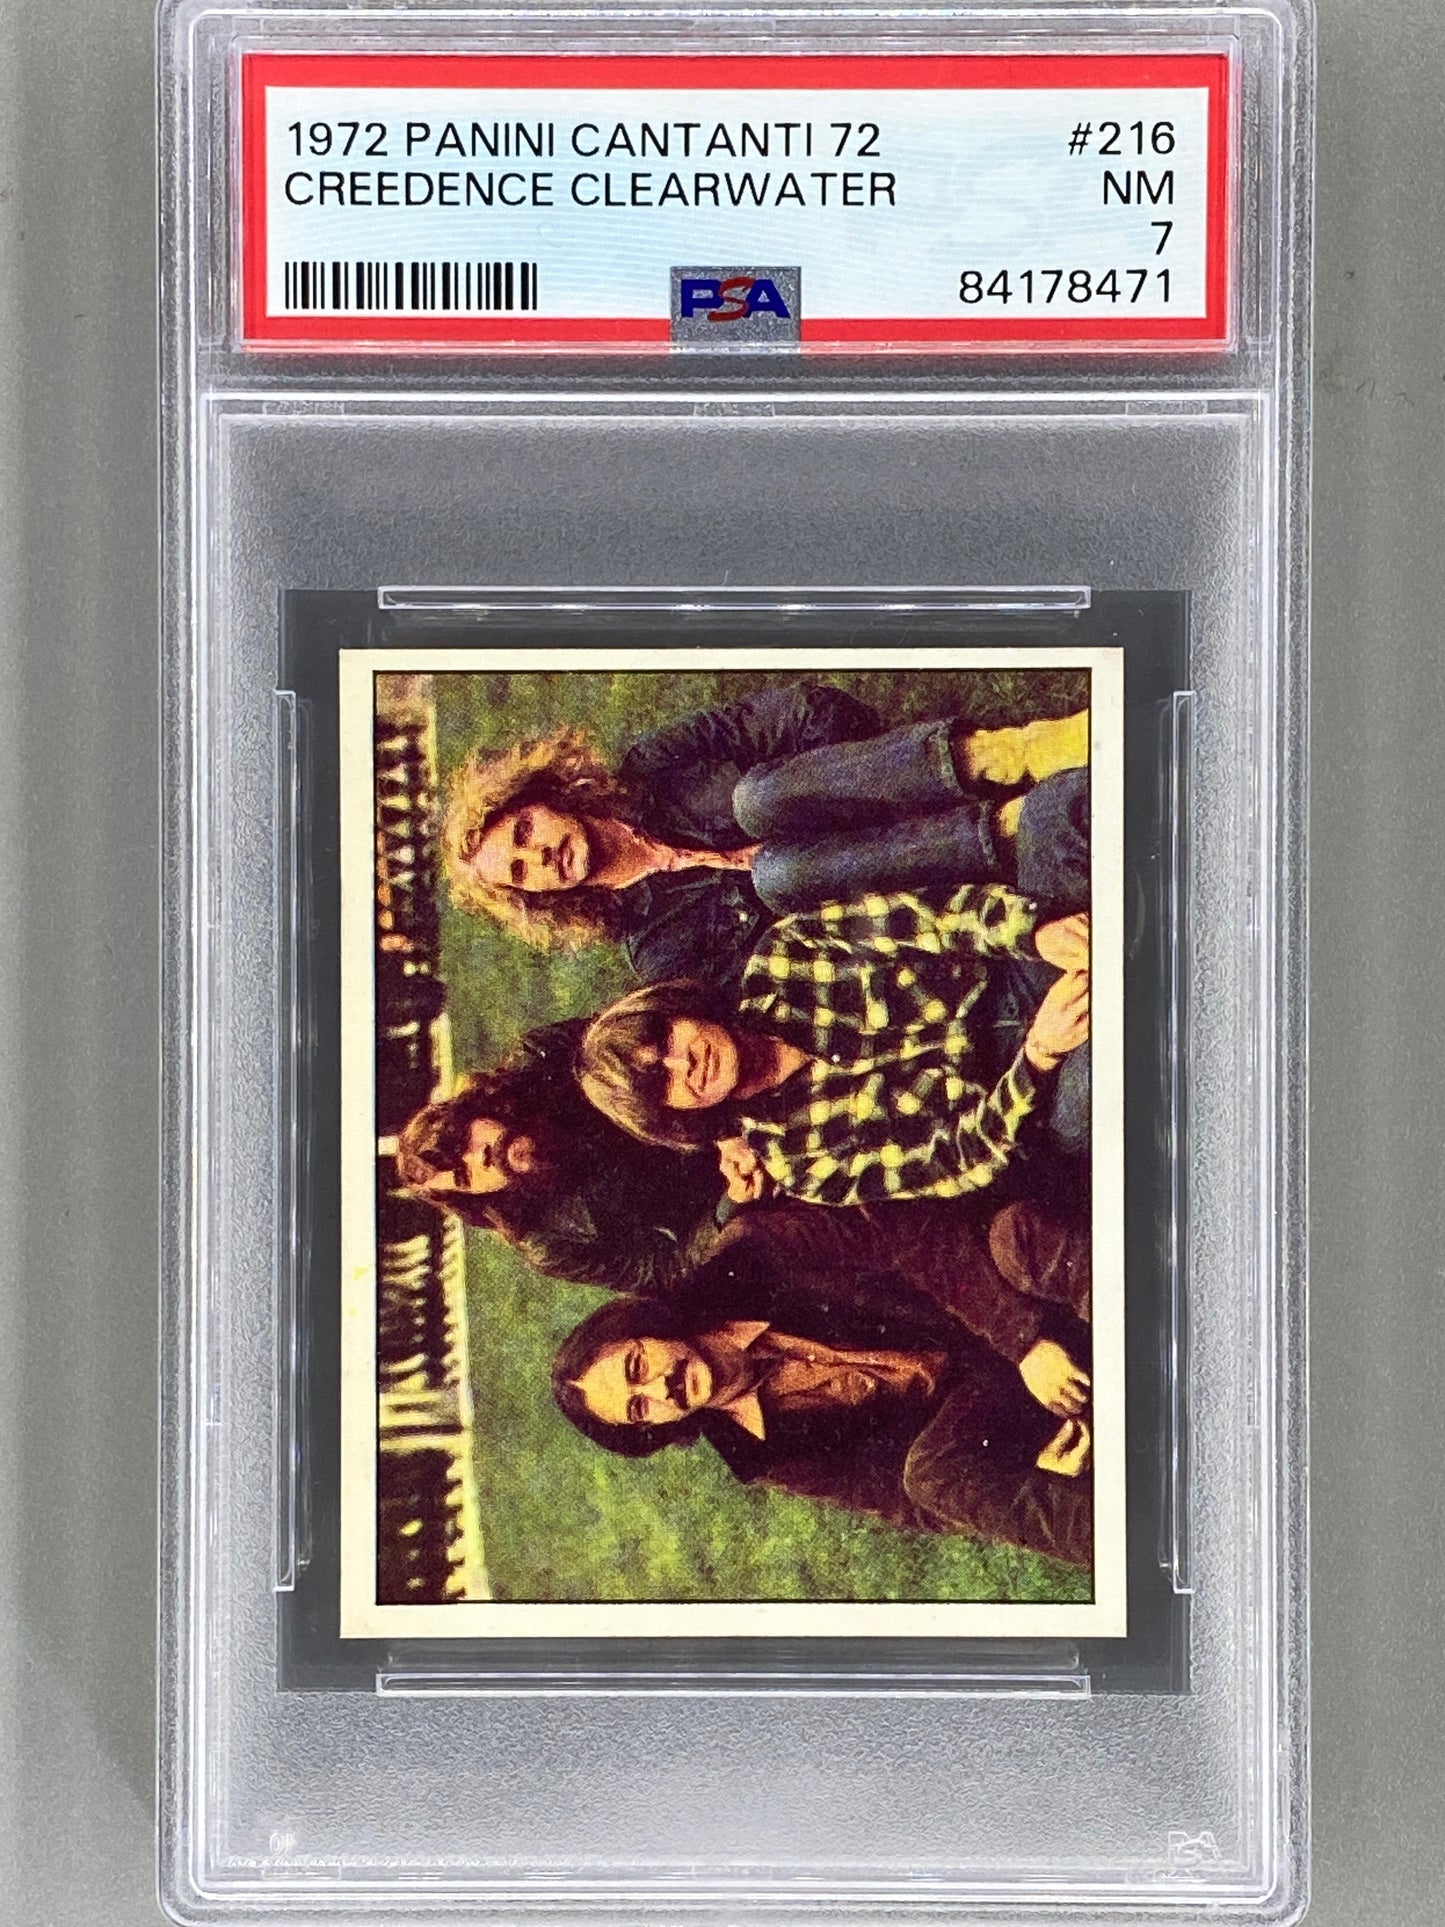 1972 Panini #216 Creedence Clearwater Cantanti 72 PSA 7 - Pop 9 (Music)